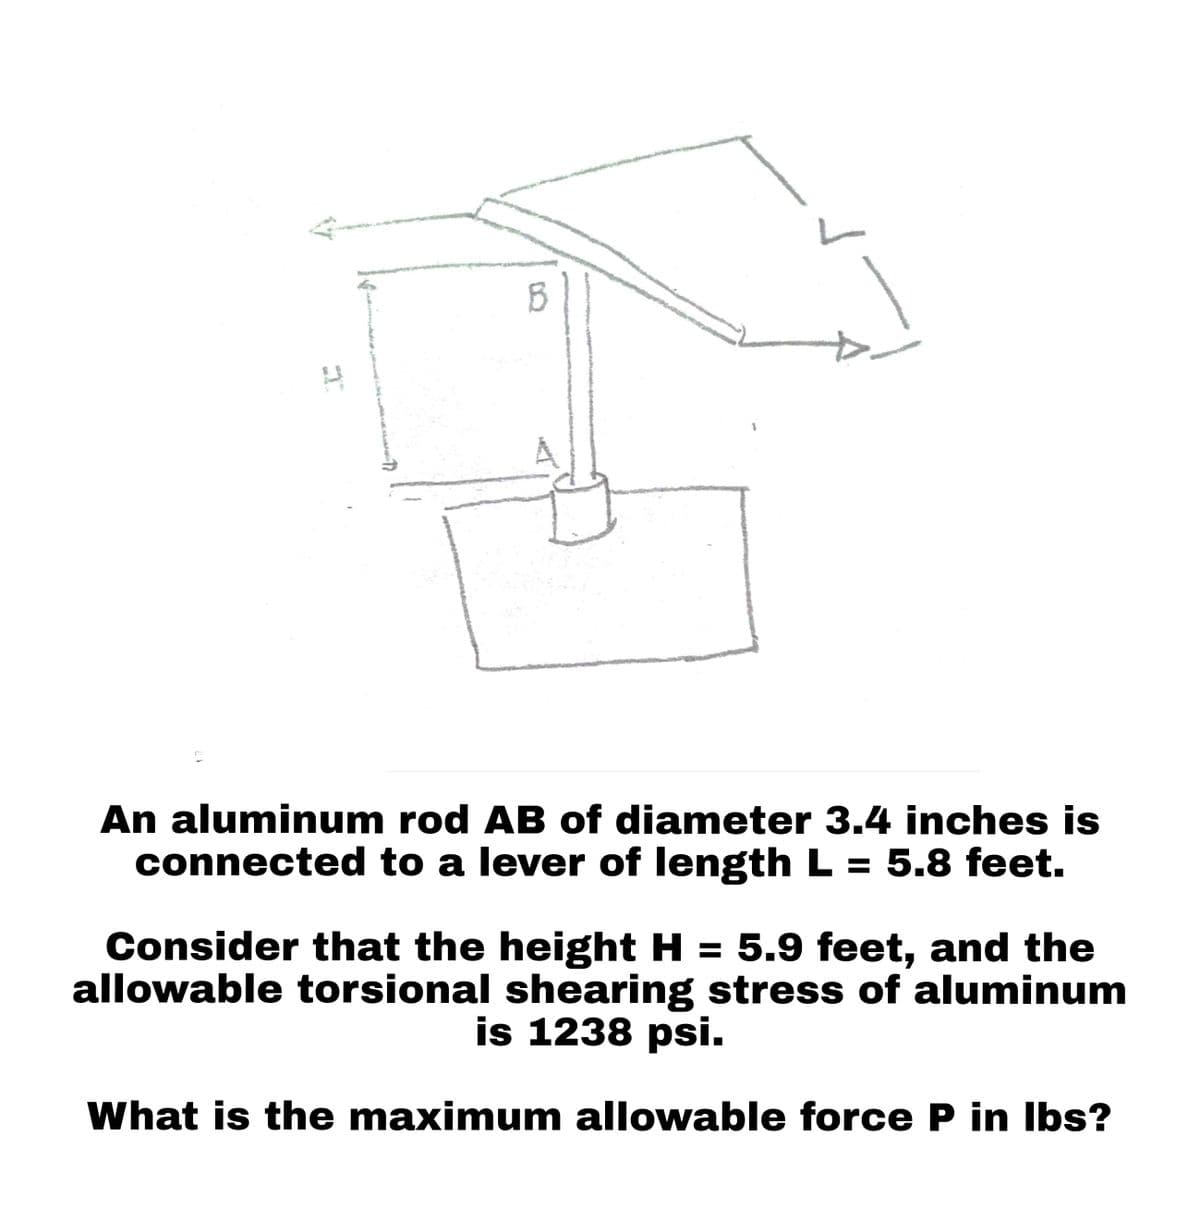 B
An aluminum rod AB of diameter 3.4 inches is
connected to a lever of length L = 5.8 feet.
Consider that the height H = 5.9 feet, and the
allowable torsional shearing stress of aluminum
is 1238 psi.
What is the maximum allowable force P in lbs?